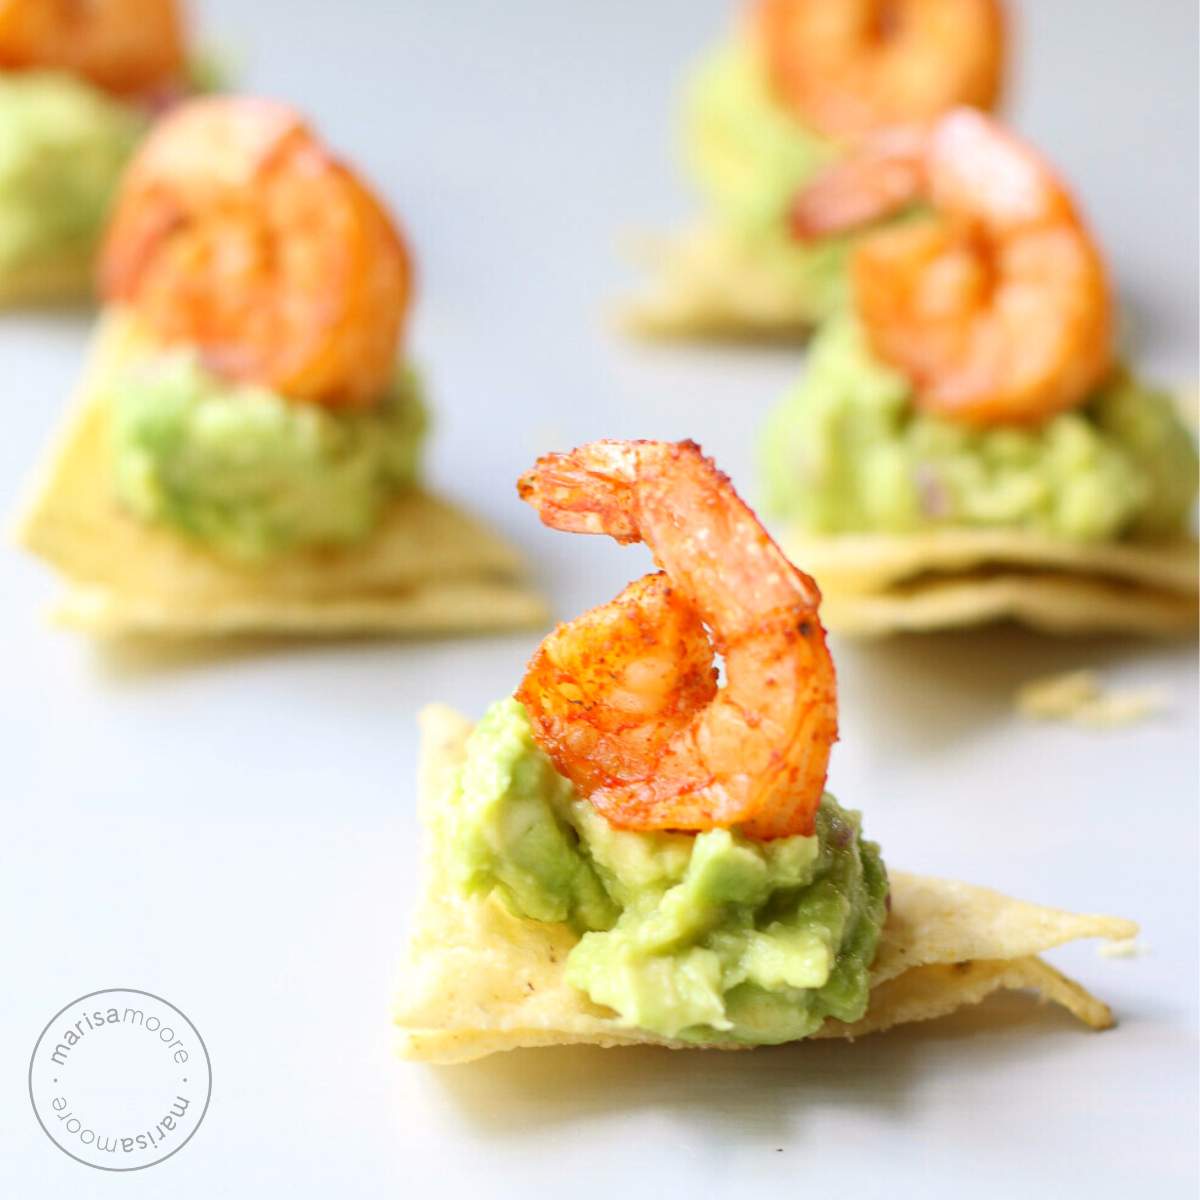 Tortilla Chips each topped with guacamole and a shrimp.